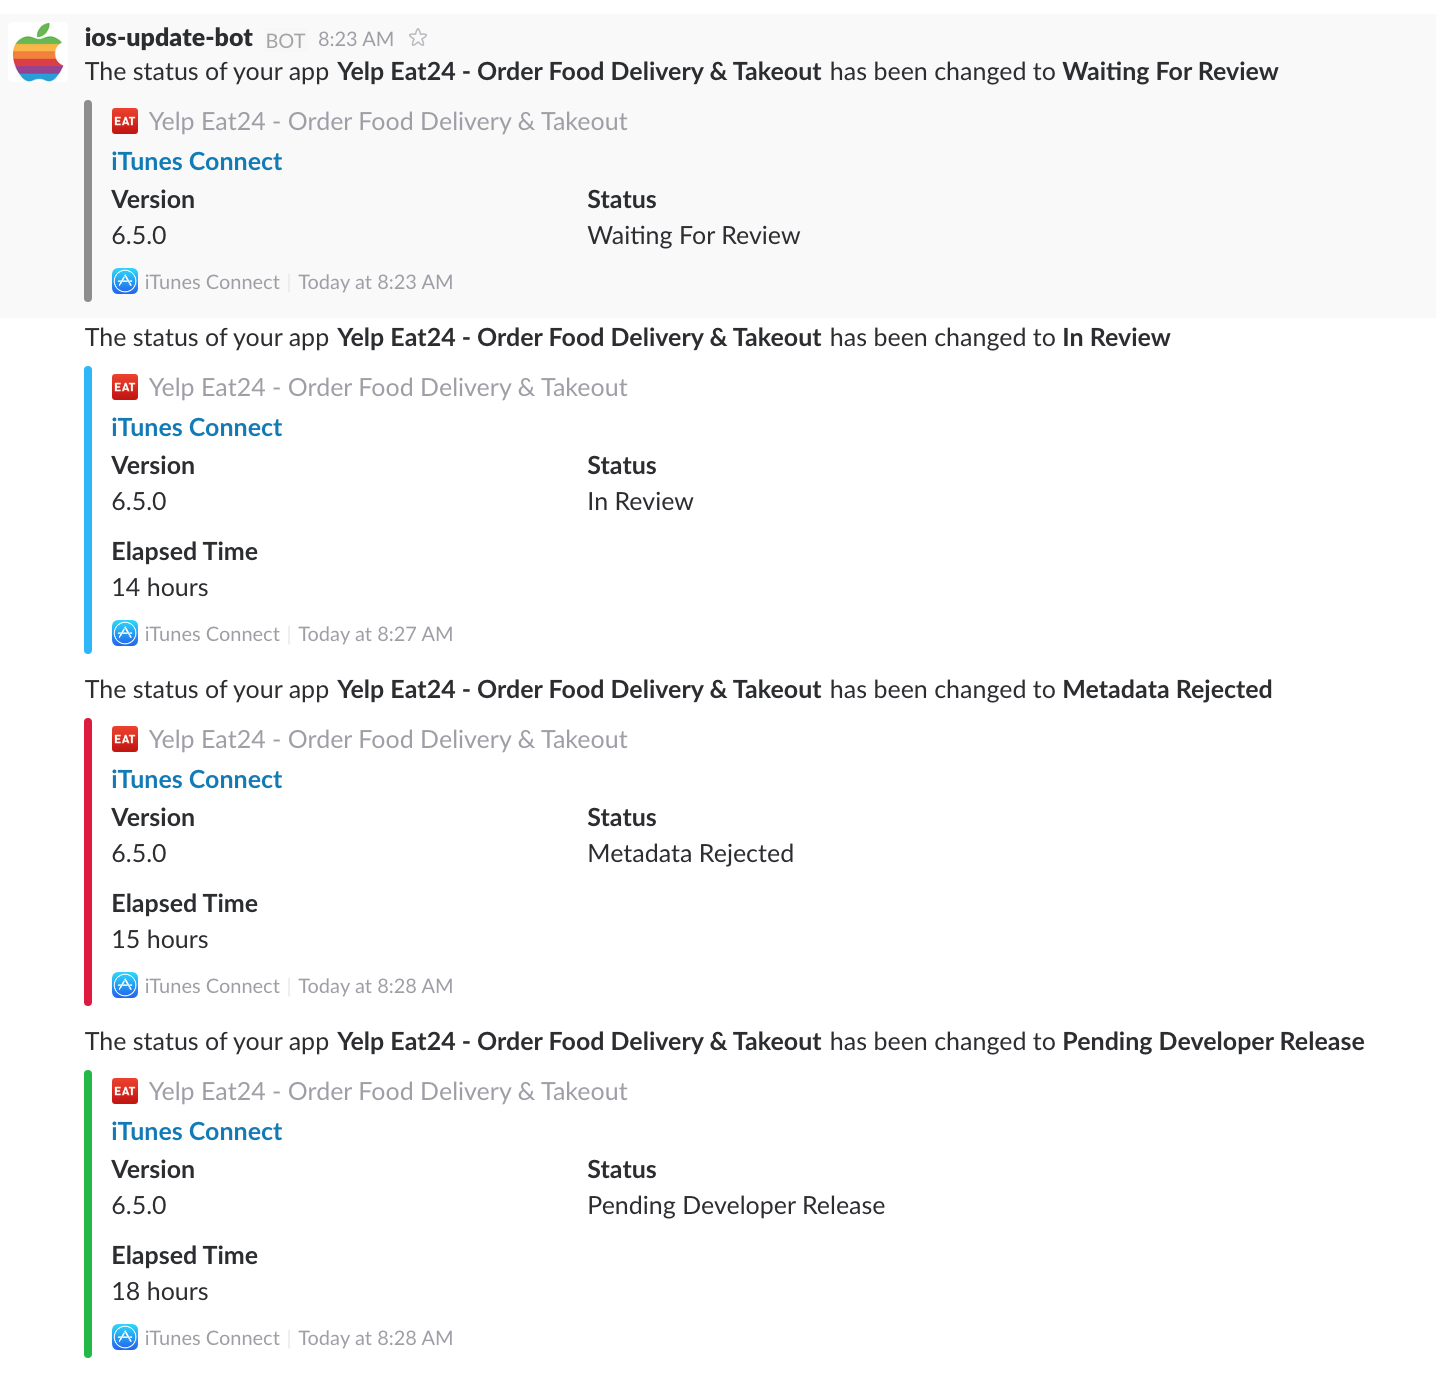 Github Danbretl App Store Connect Chime Posts App Update Info From Itunes Connect Into Slack